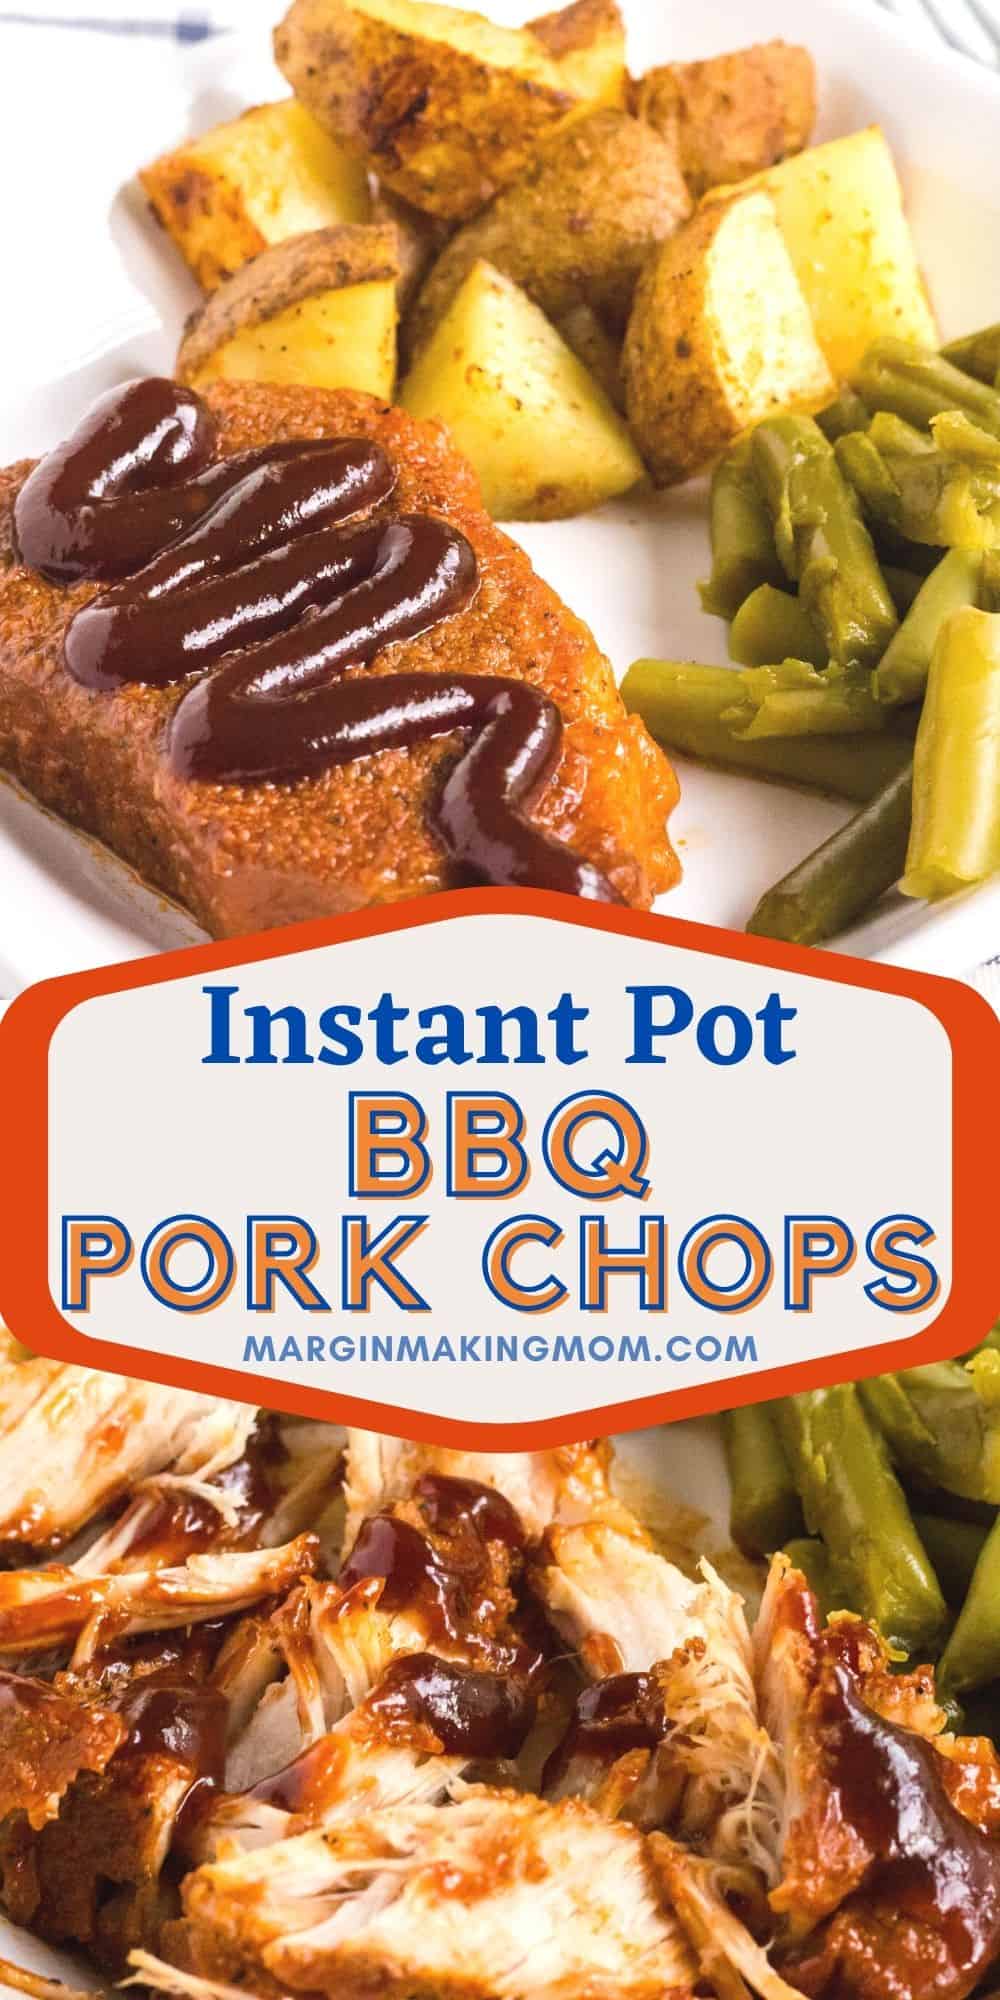 collage image of two photos; one shows a whole Instant Pot bbq pork chop on a plate, with BBQ sauce on top. The other shows the pork chop pulled into chunks.